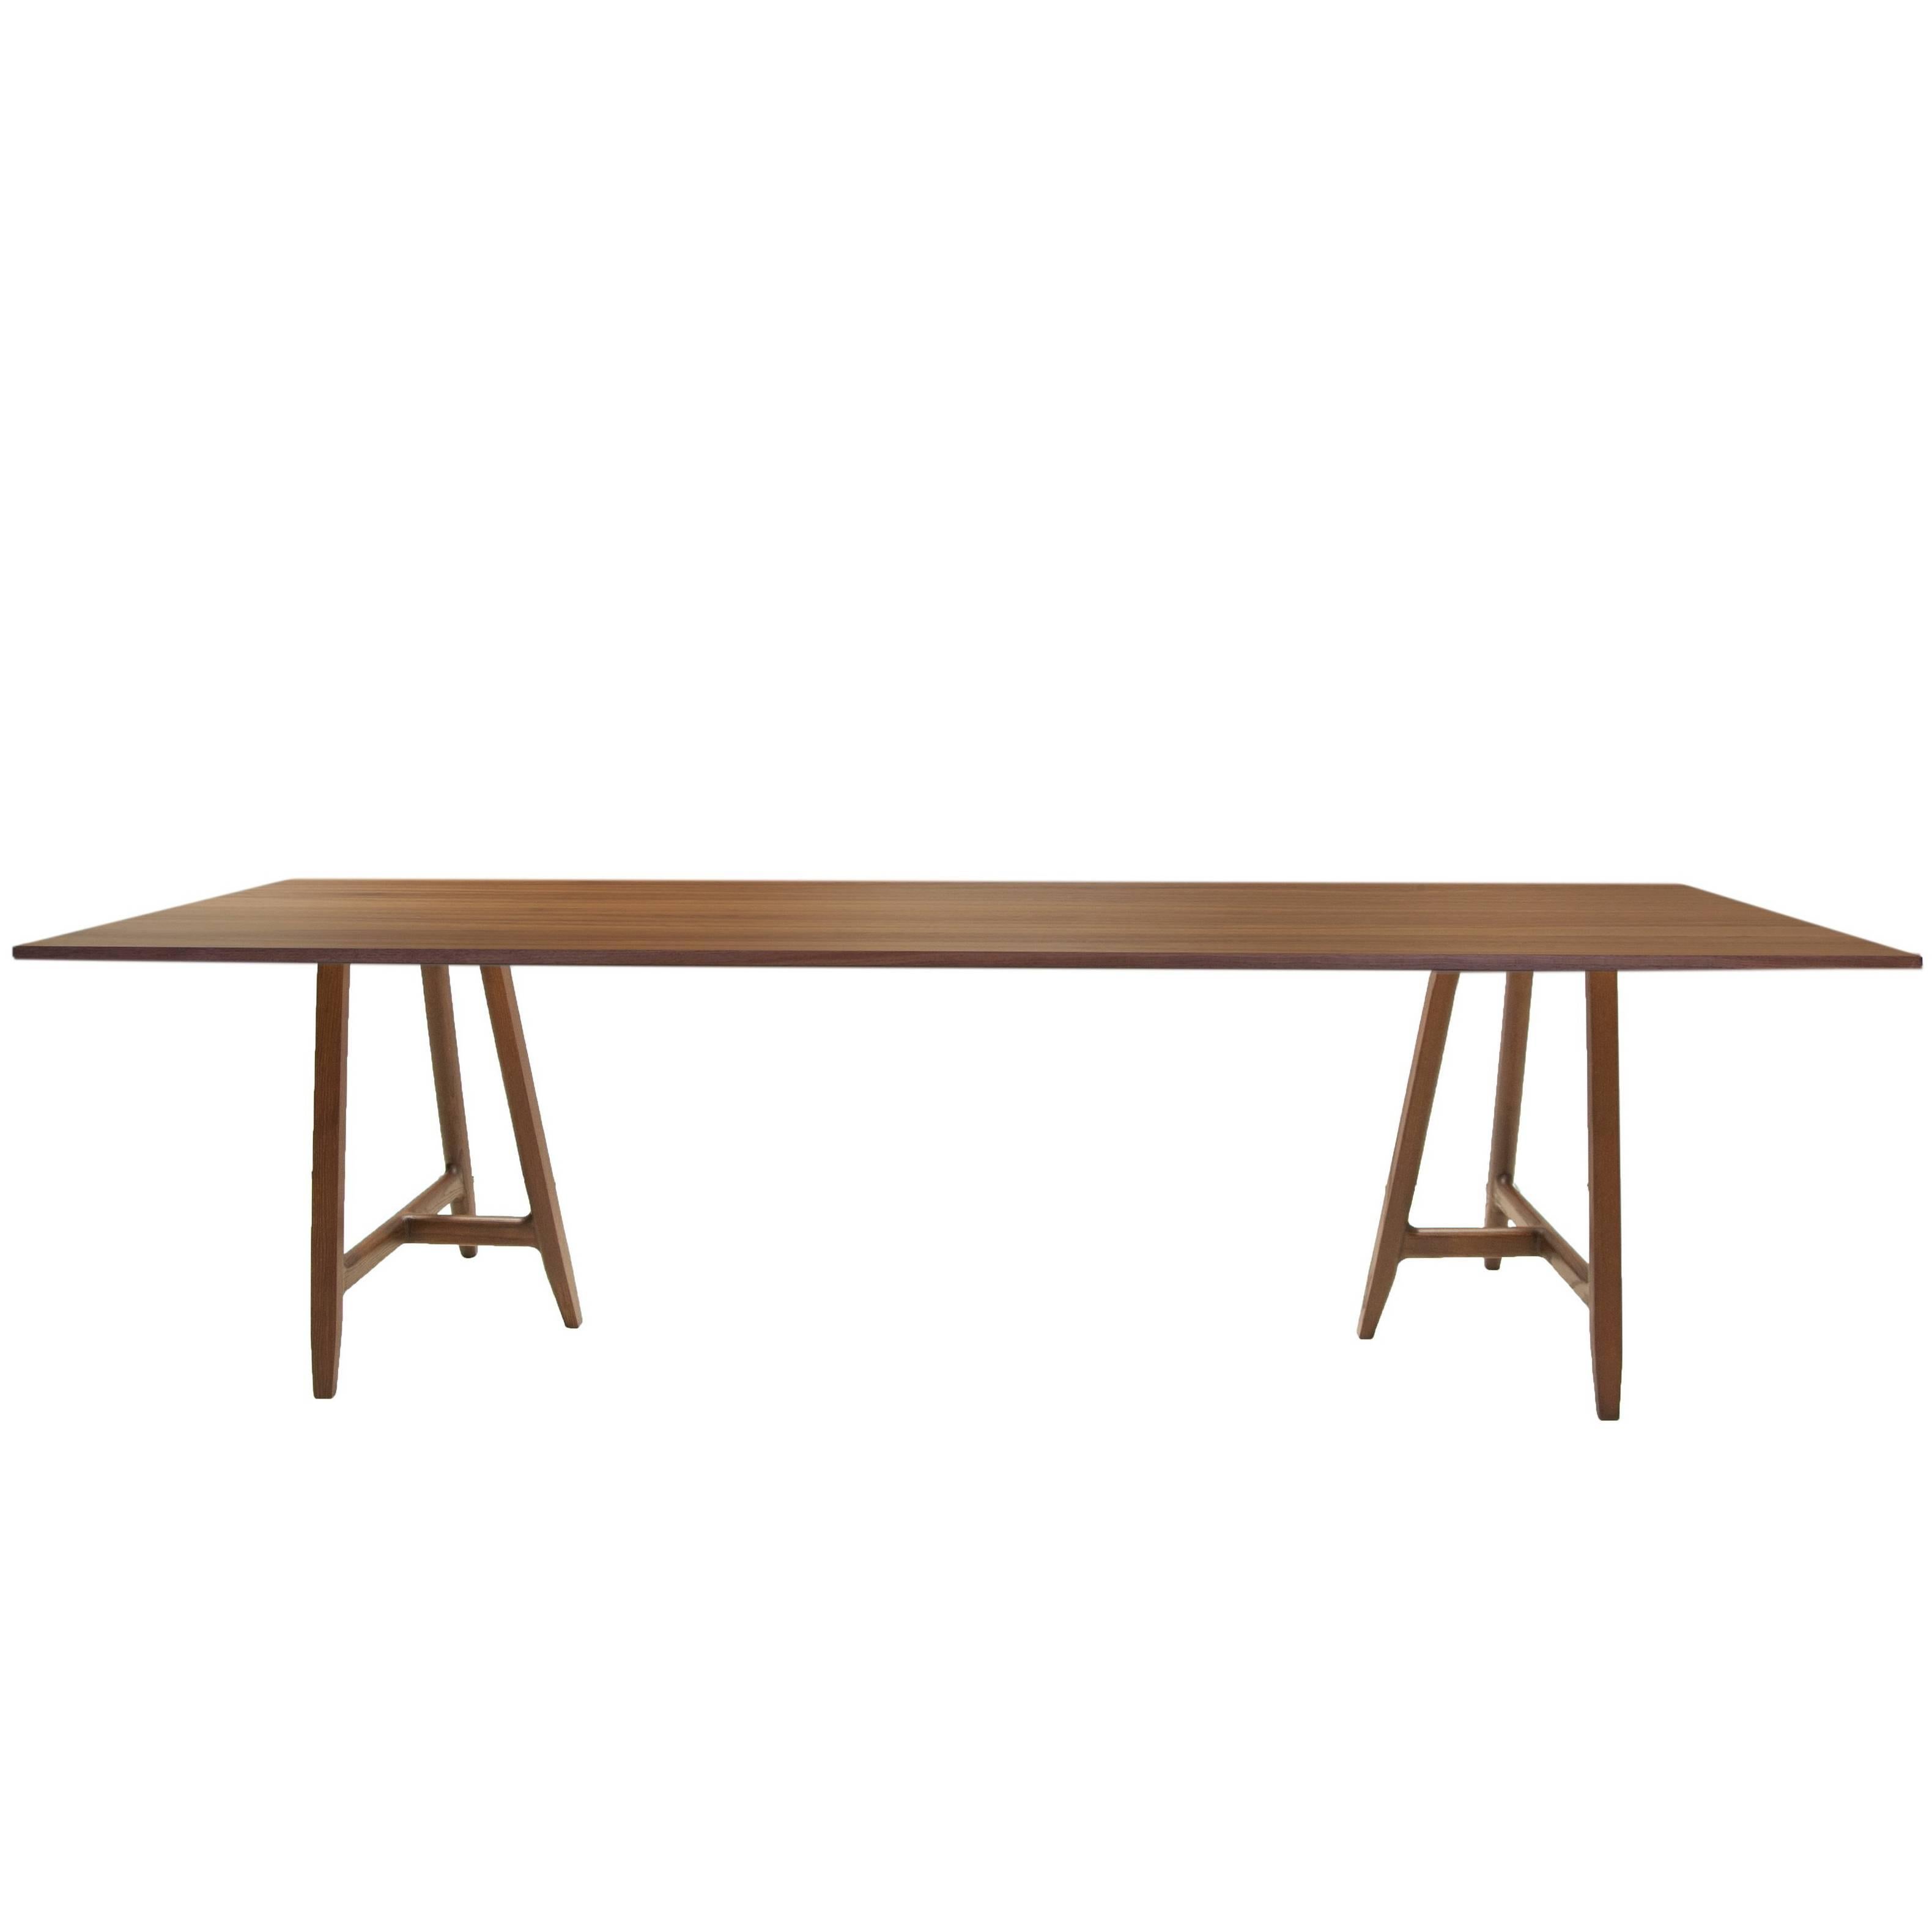 "Easel" Canaletto Walnut Table by Ludovica and Roberto Palomba for Driade For Sale